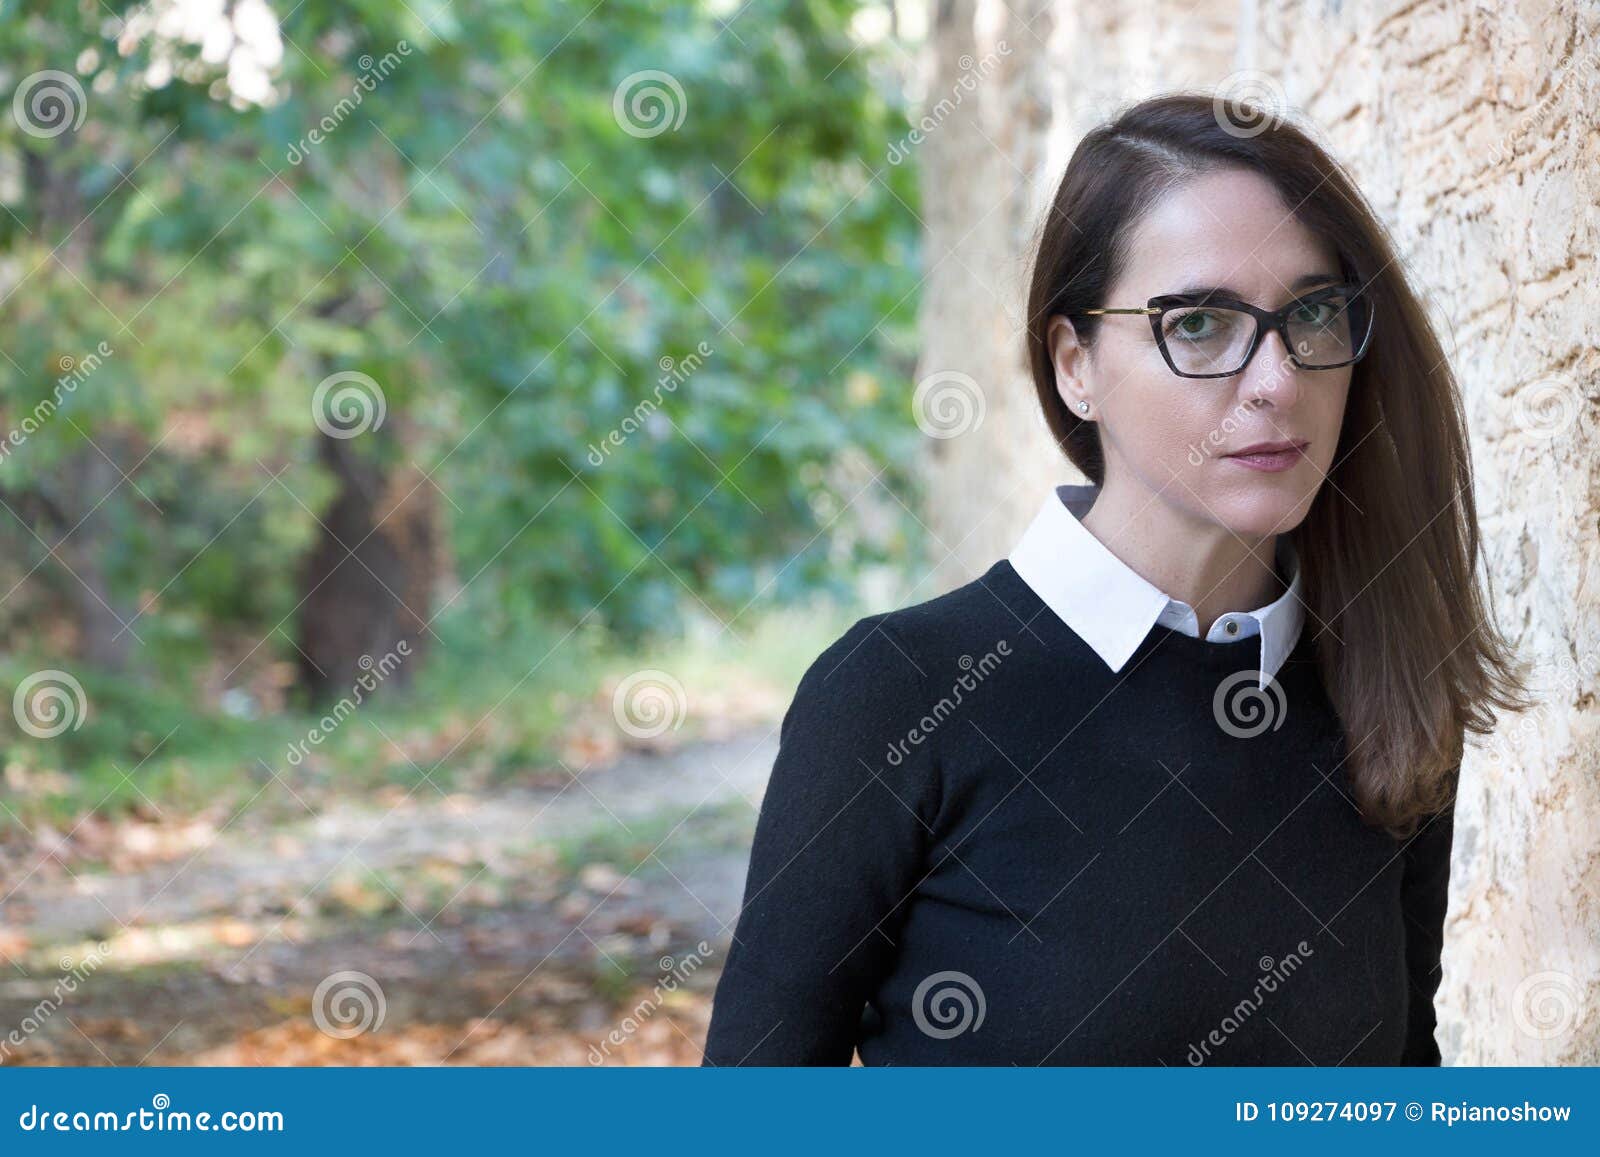 Portrait Of A Mature Woman Wearing Glasses Stock Image